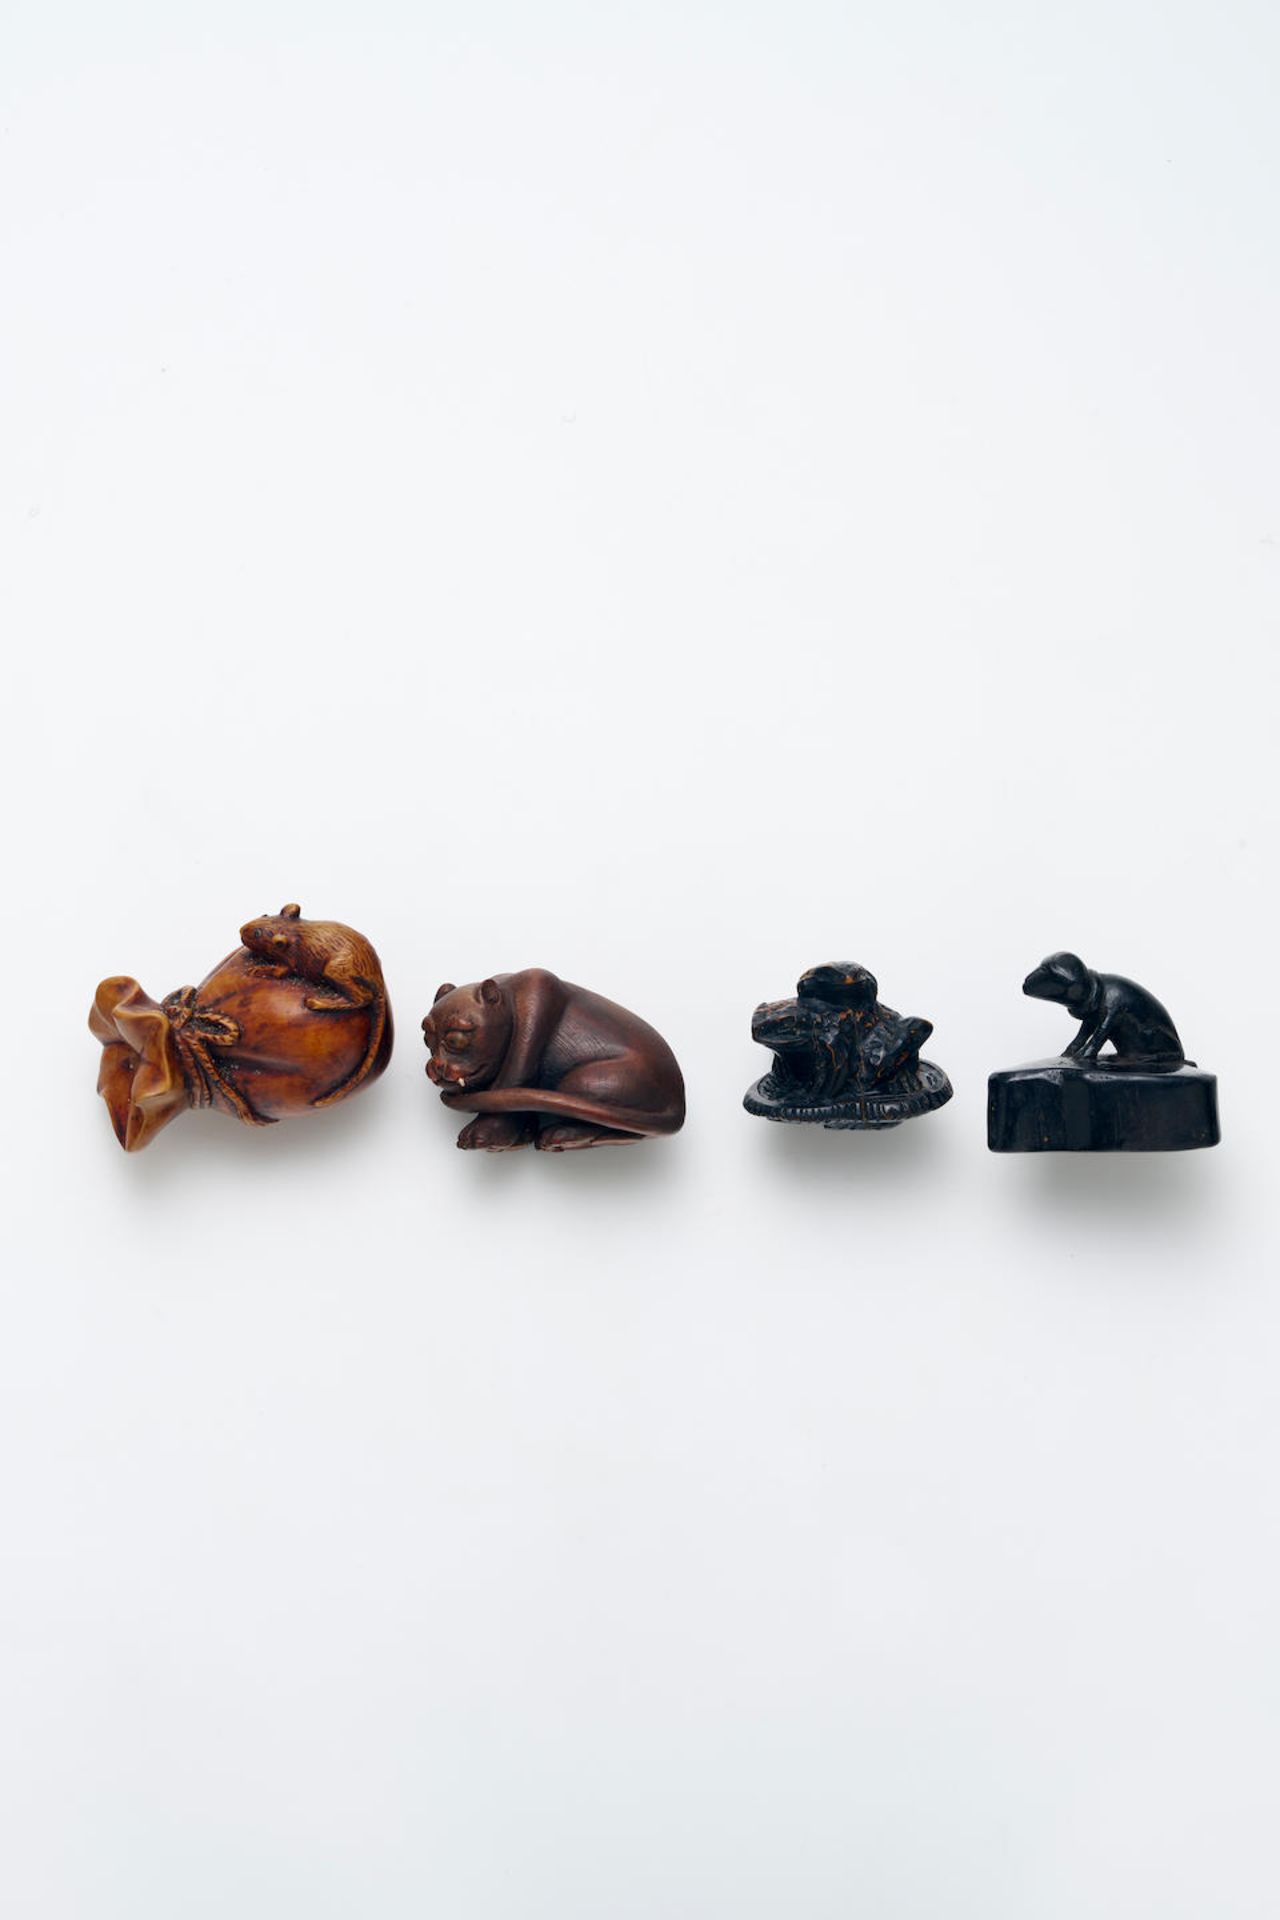 FOUR WOODEN ANIMAL THEME NETSUKE Meiji Period and later, 19th/20th Century (4)